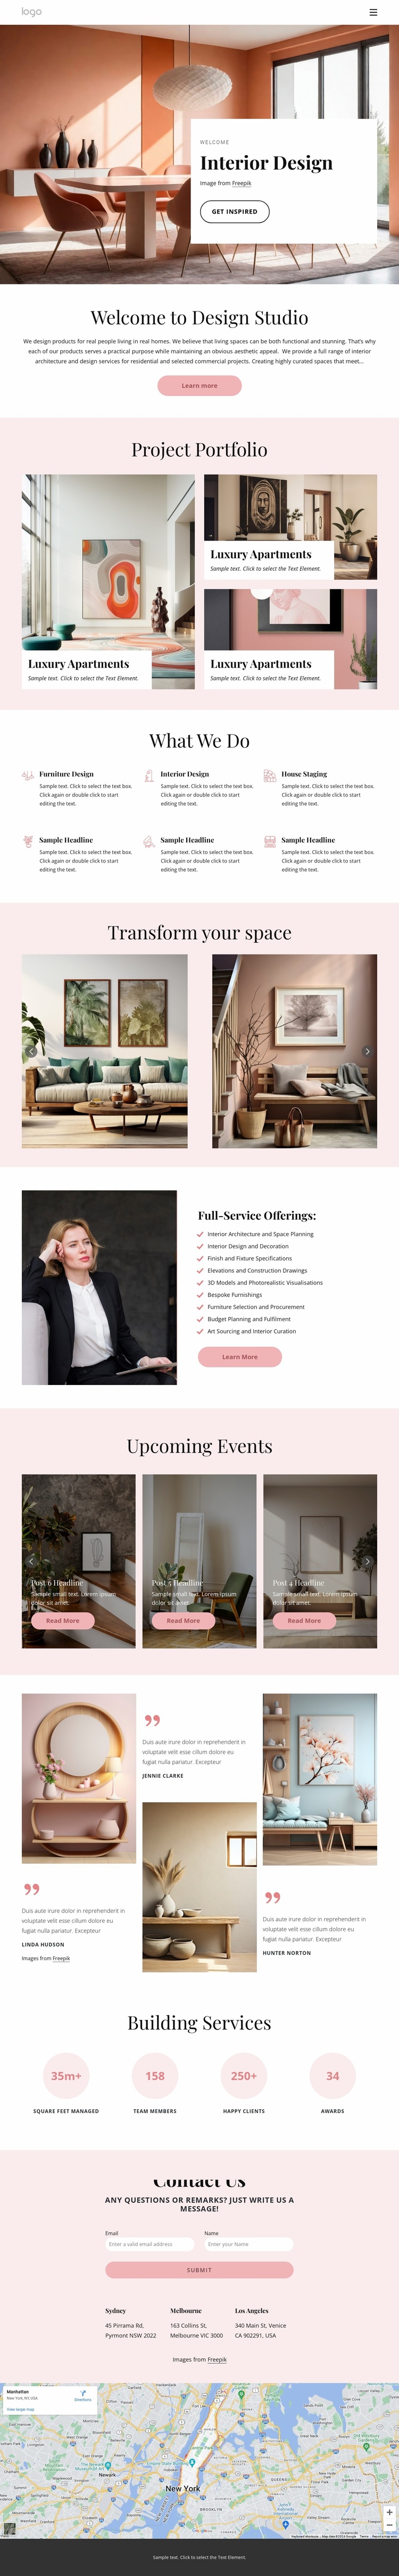 The interior design firm eCommerce Template